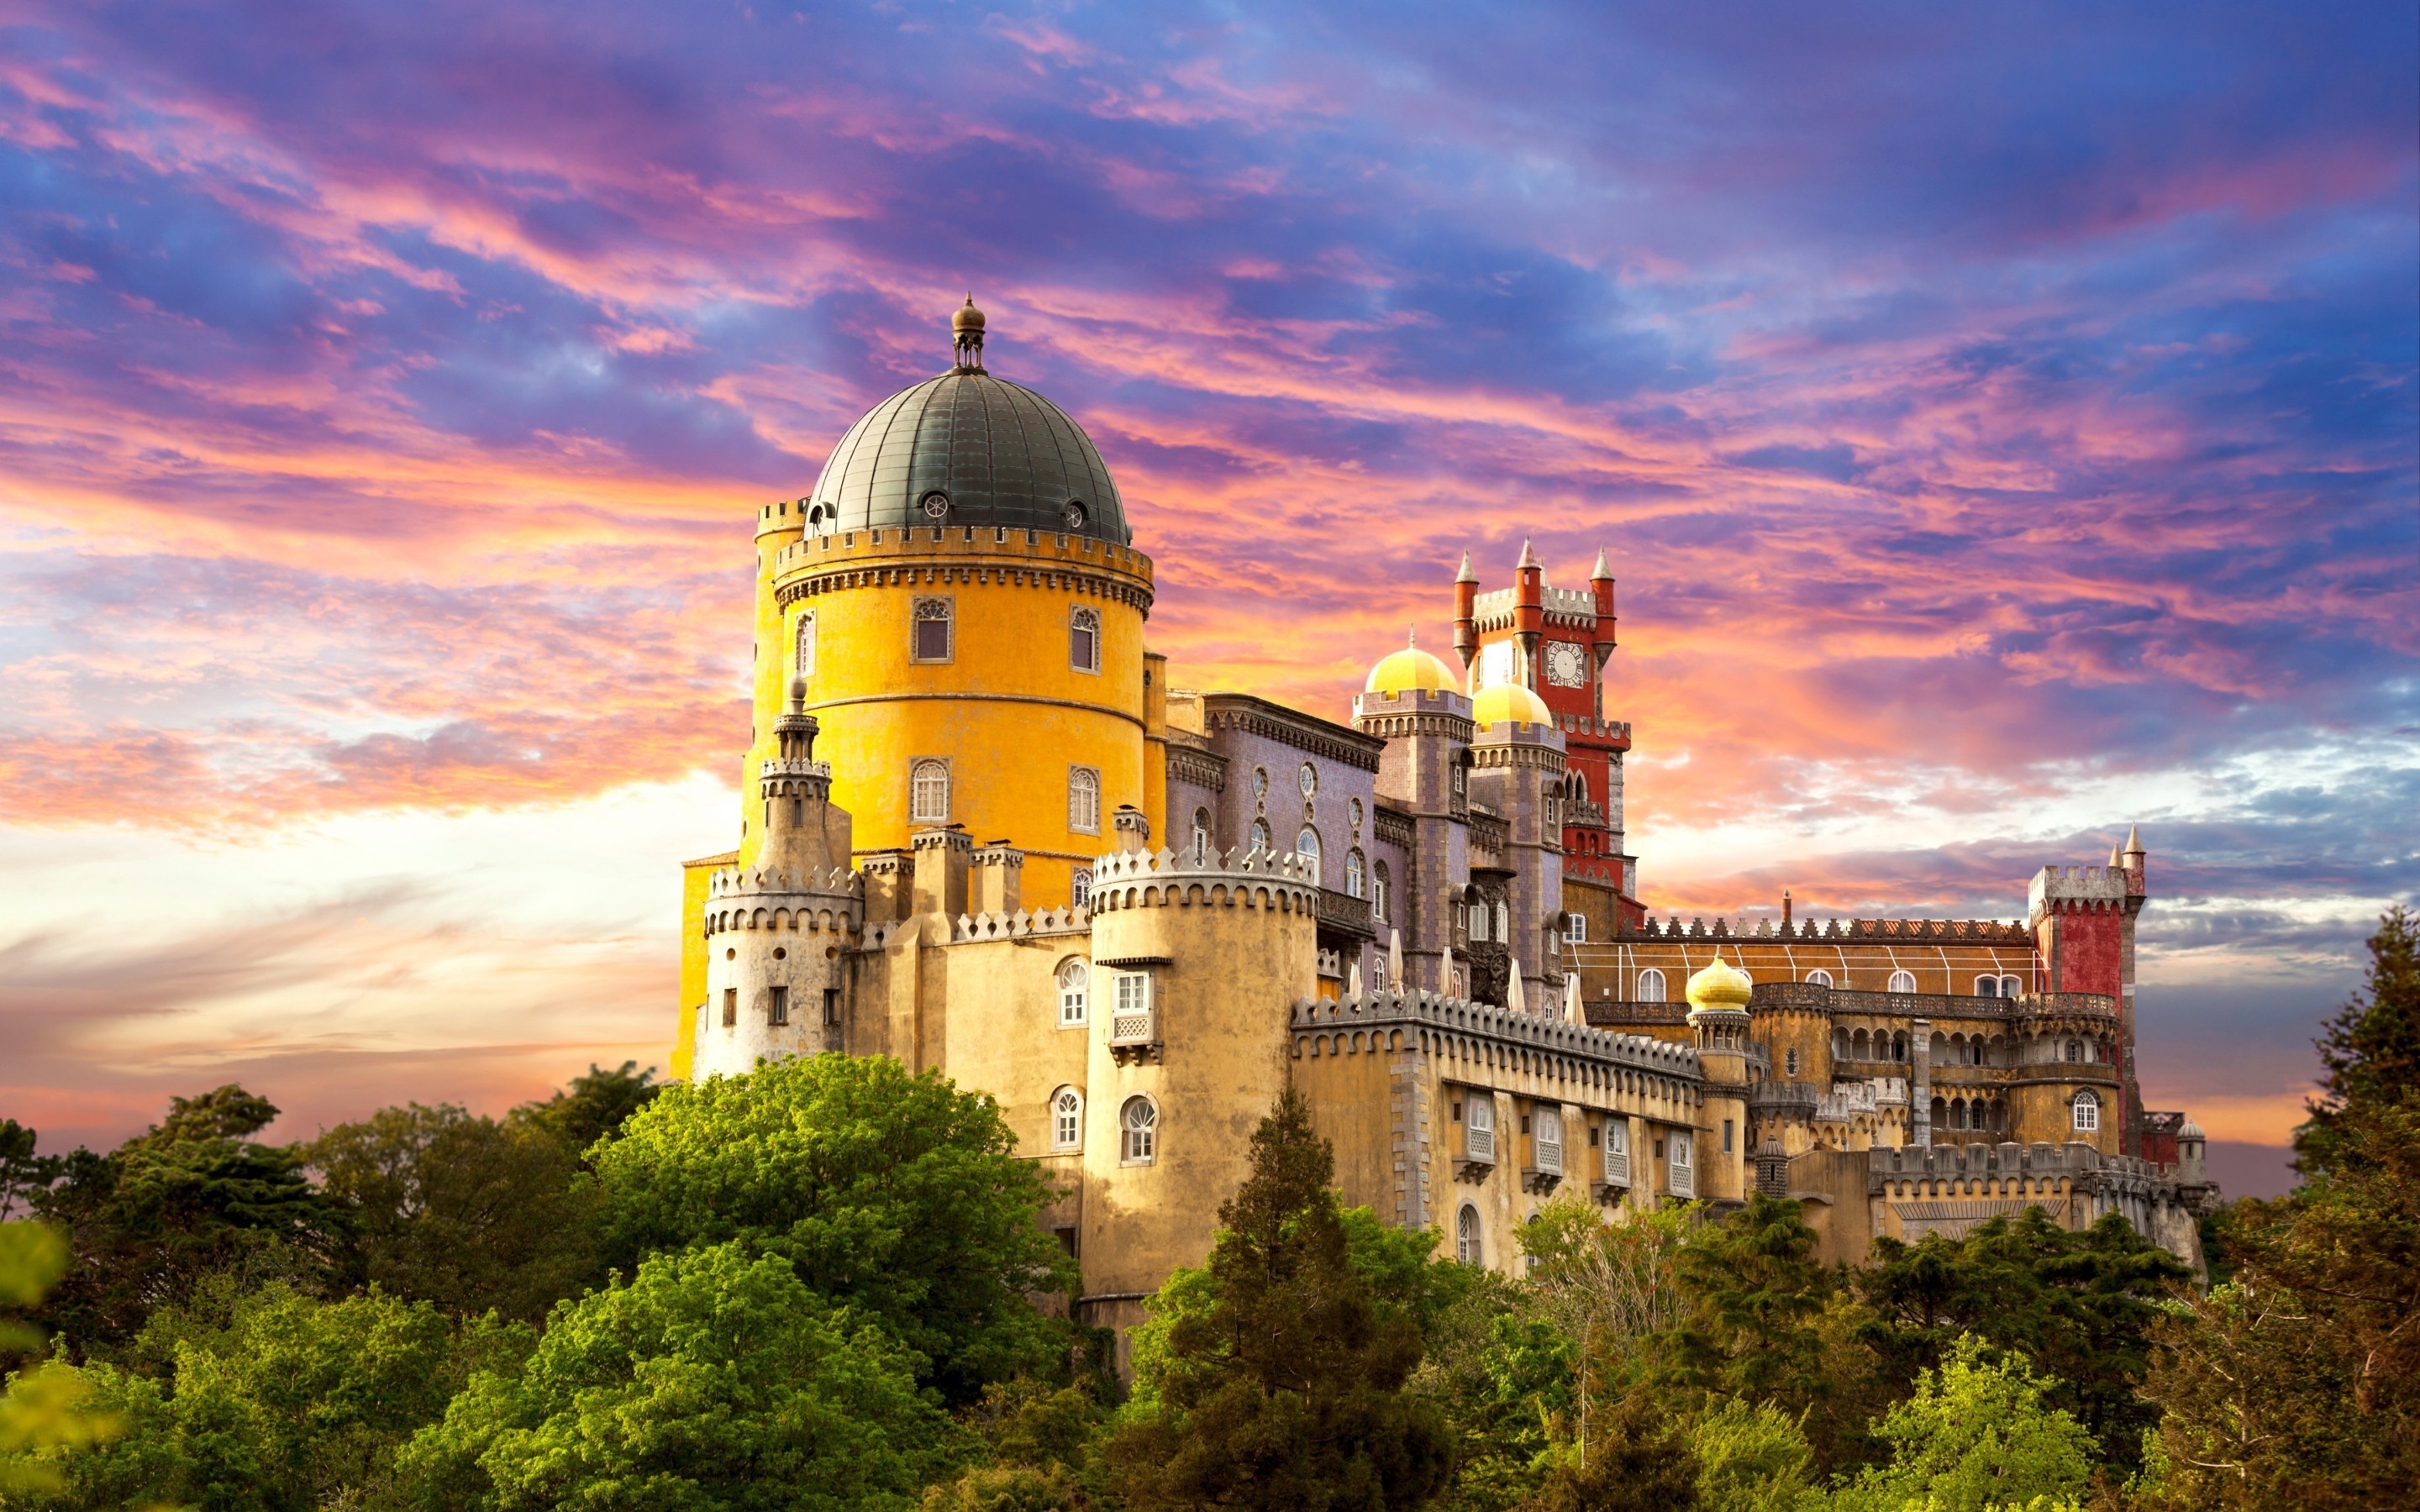 Pena National Palace Portugal for 2880 x 1800 Retina Display resolution